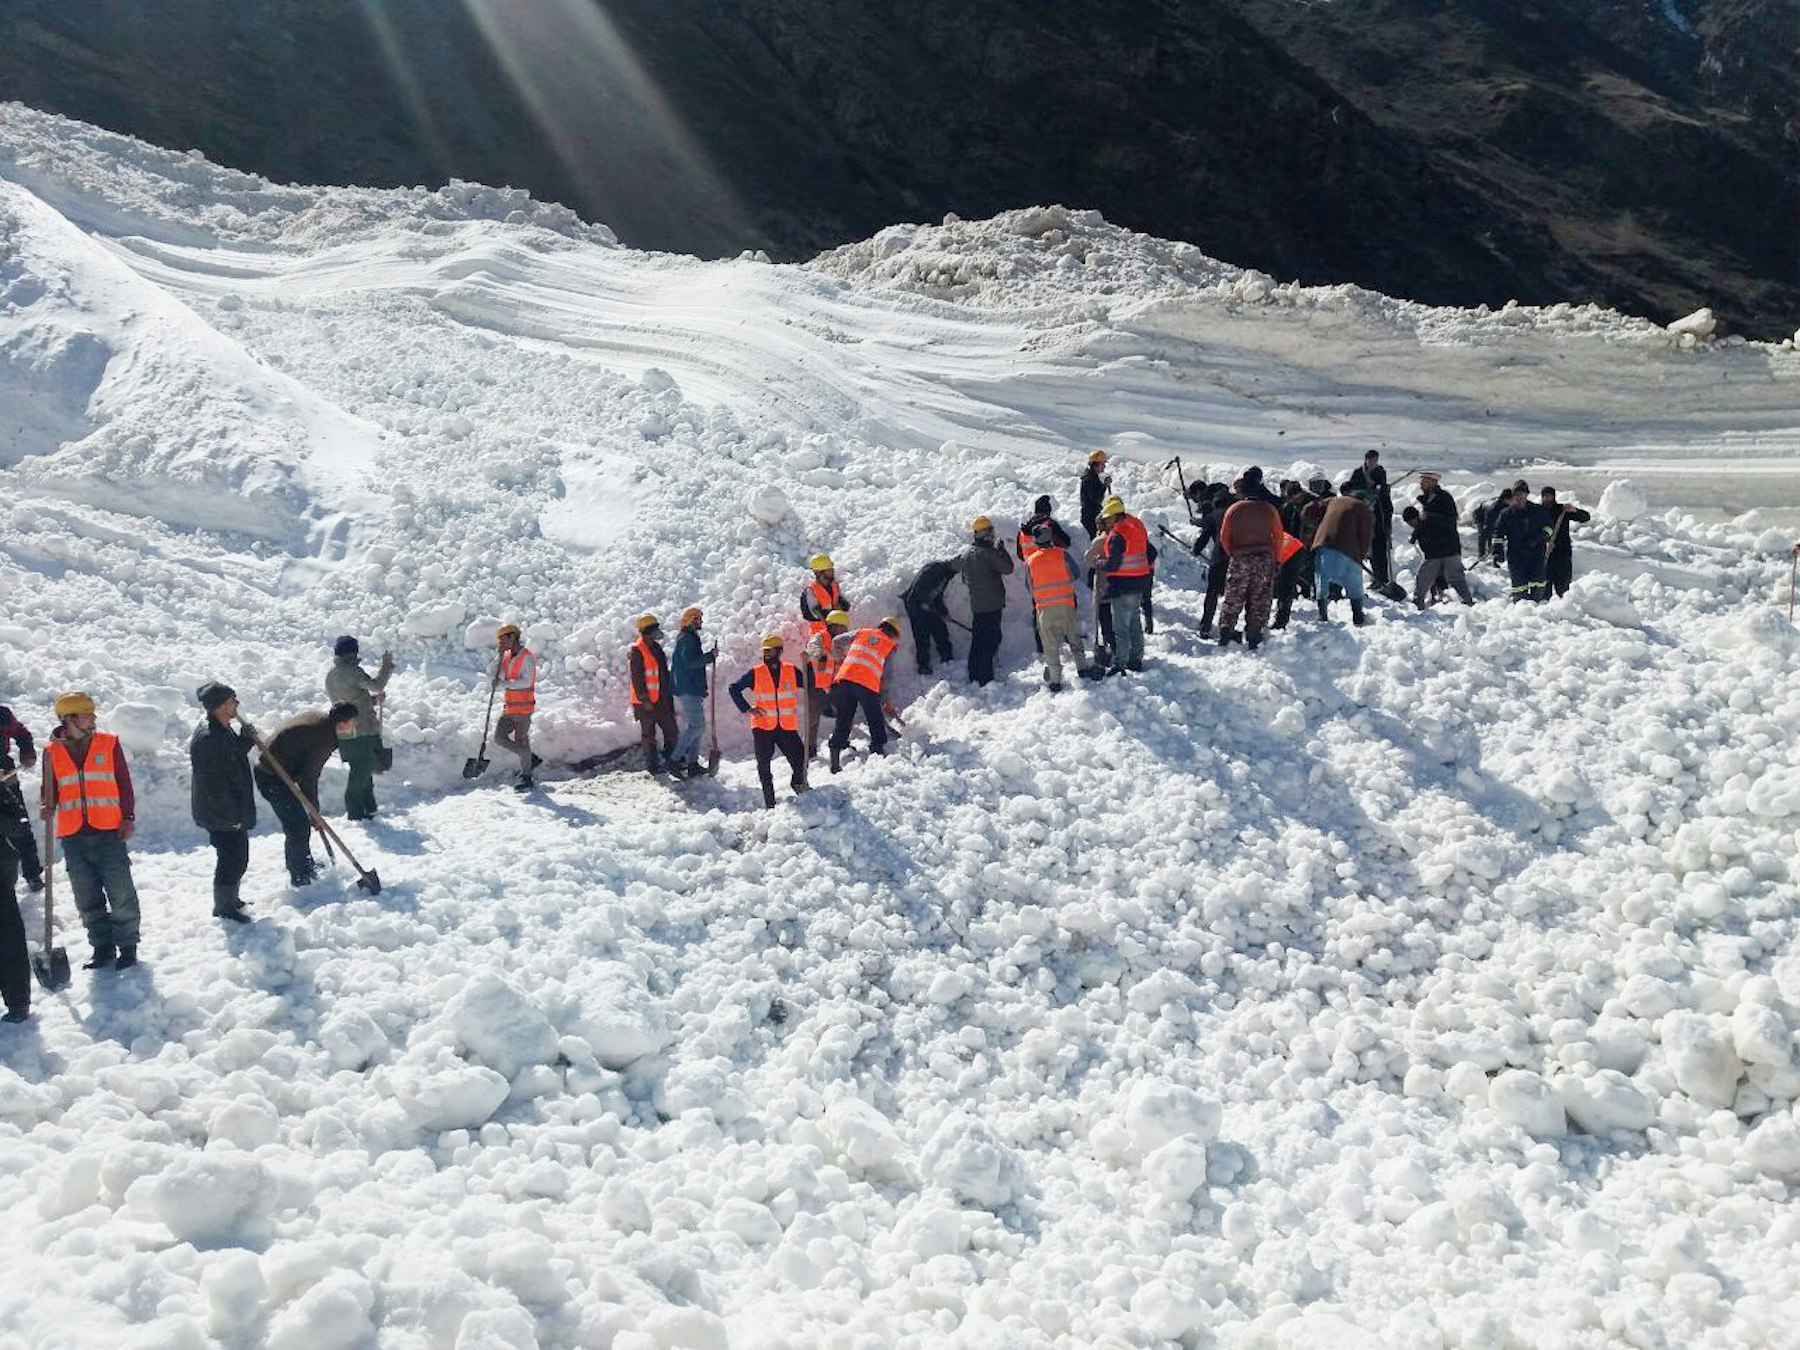 Community Emergency Response volunteers trained by the Aga Khan Agency for Habitat (AKAH) have been mobilised, at the request of the Government of Tajikistan, after over 50 avalanches have hit the region. (Picture: AKAH volunteers clear a road blocked by an avalanche in Badakhshan in 2021).